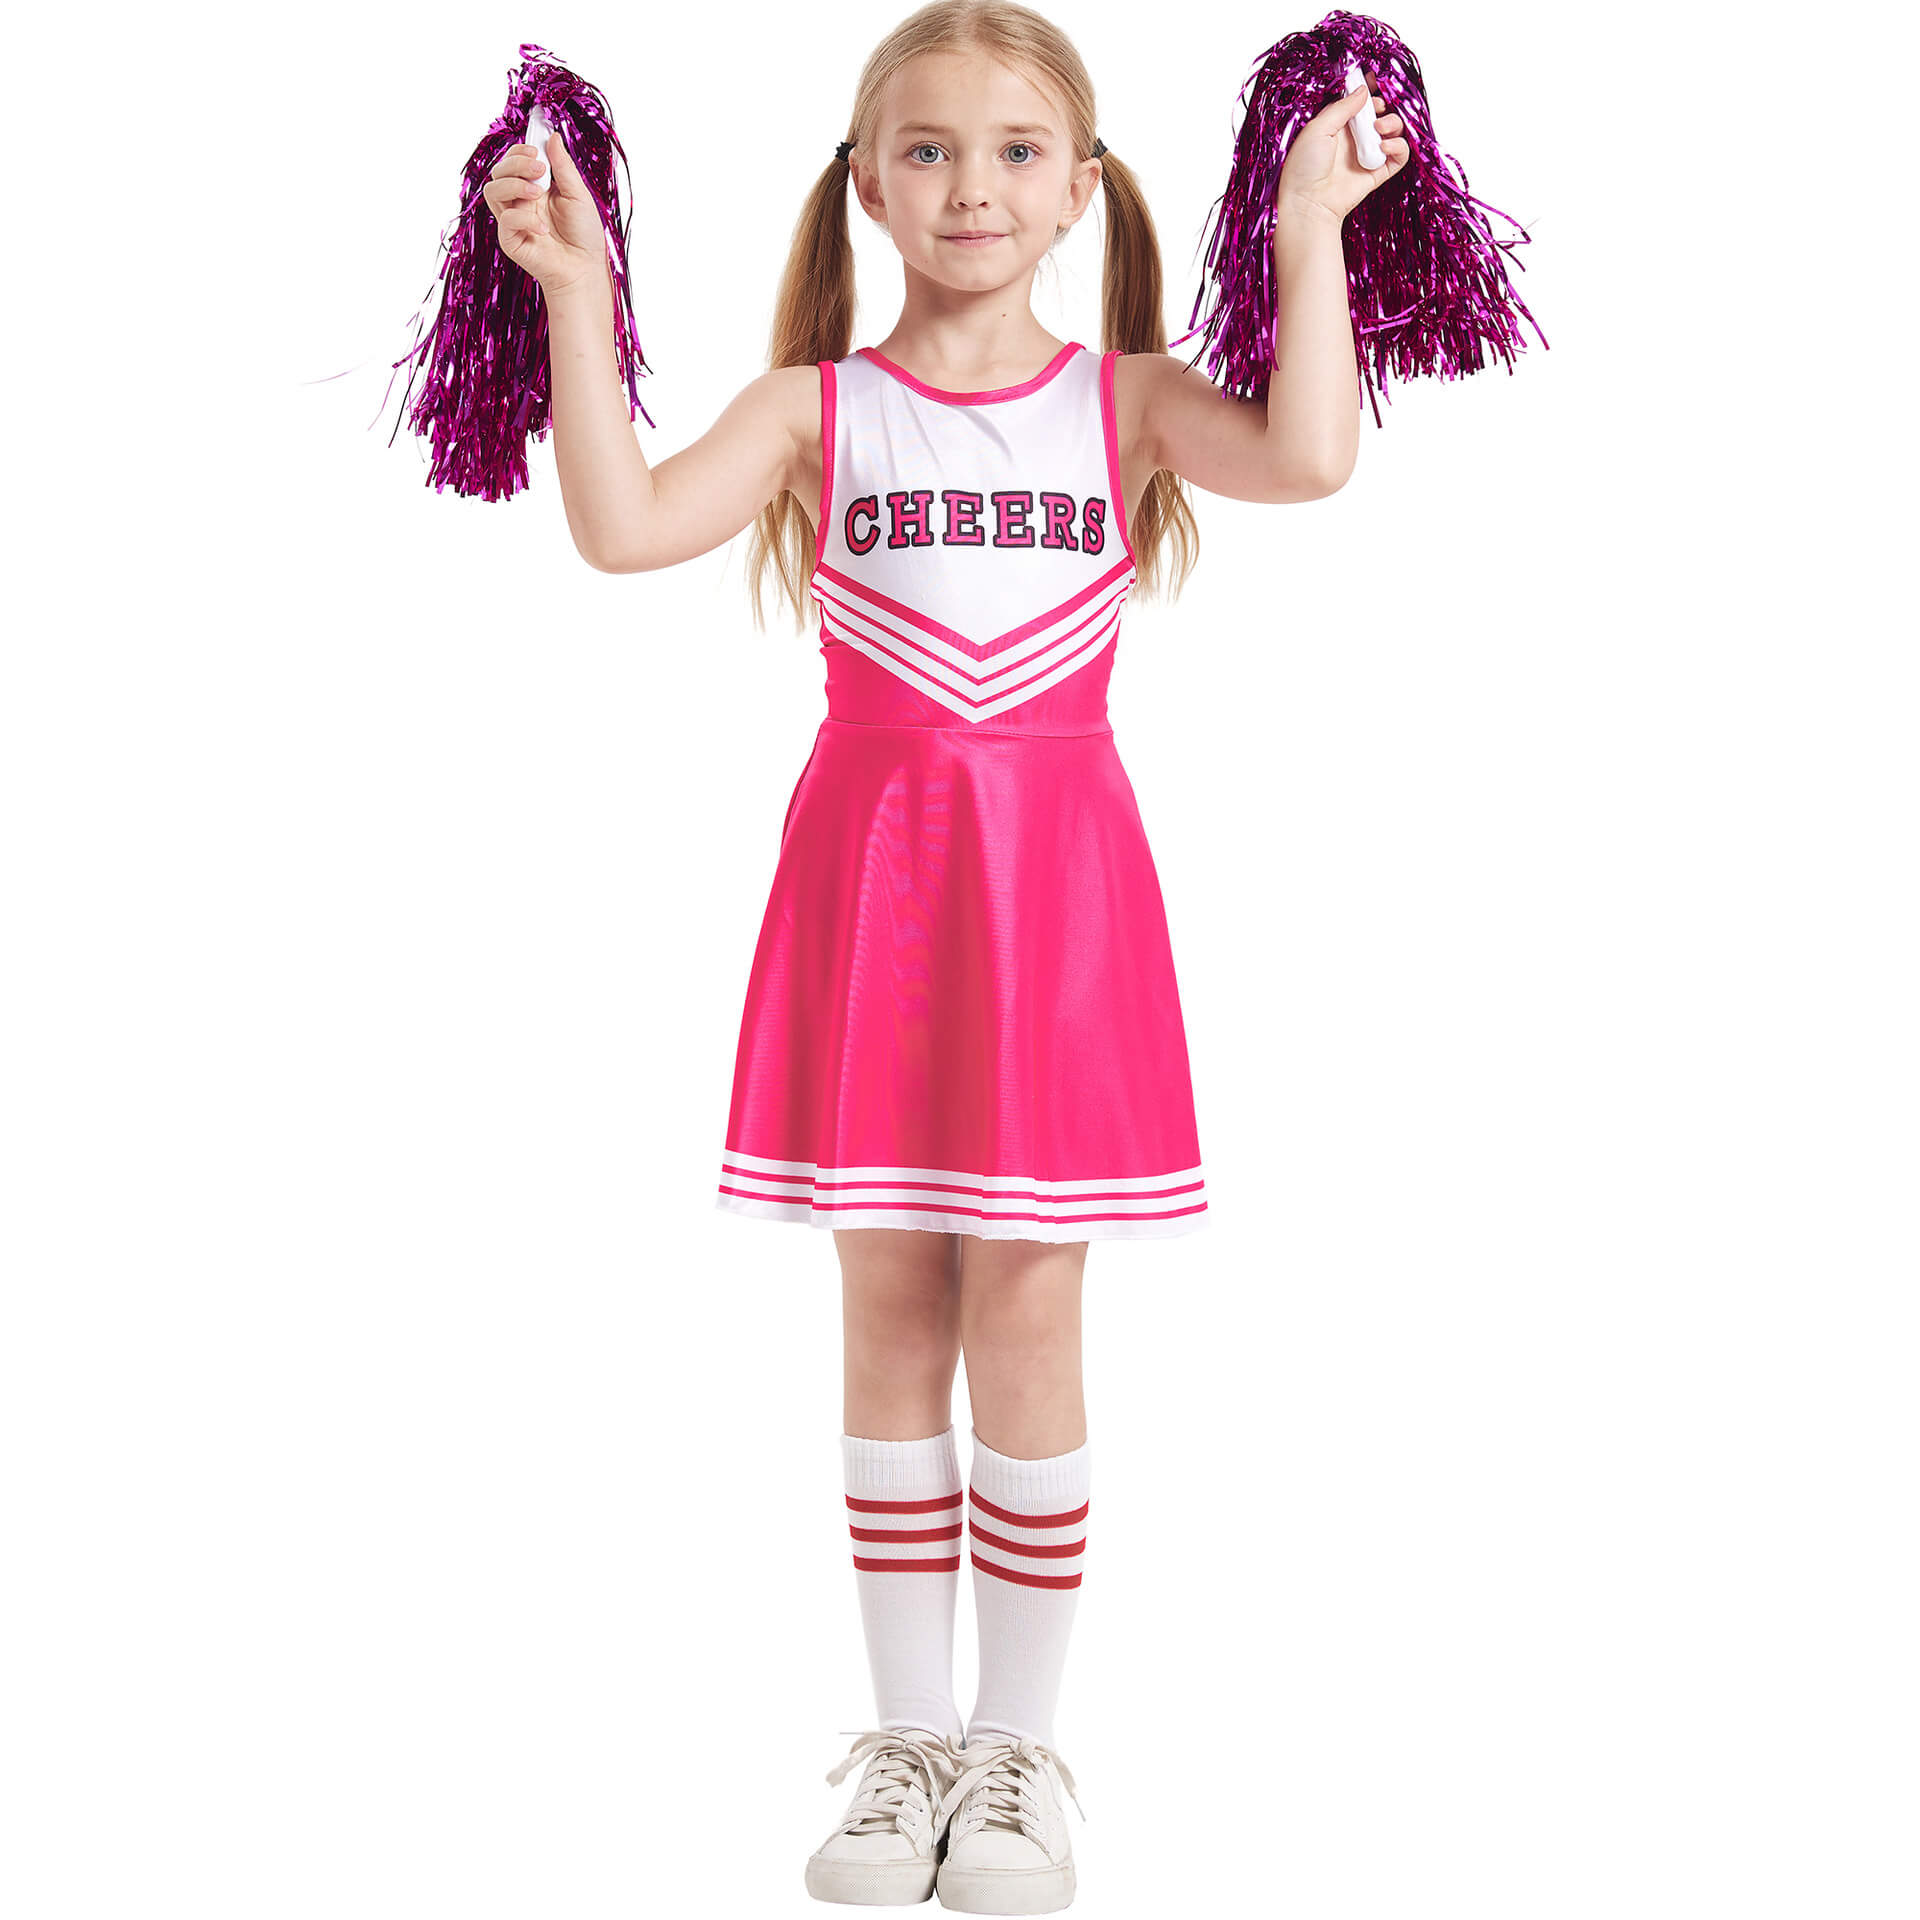 Kids Cheerleader Uniforms Girls 5t-10 Fancy Cheer Costume Cute Dress with Pom Poms and Socks